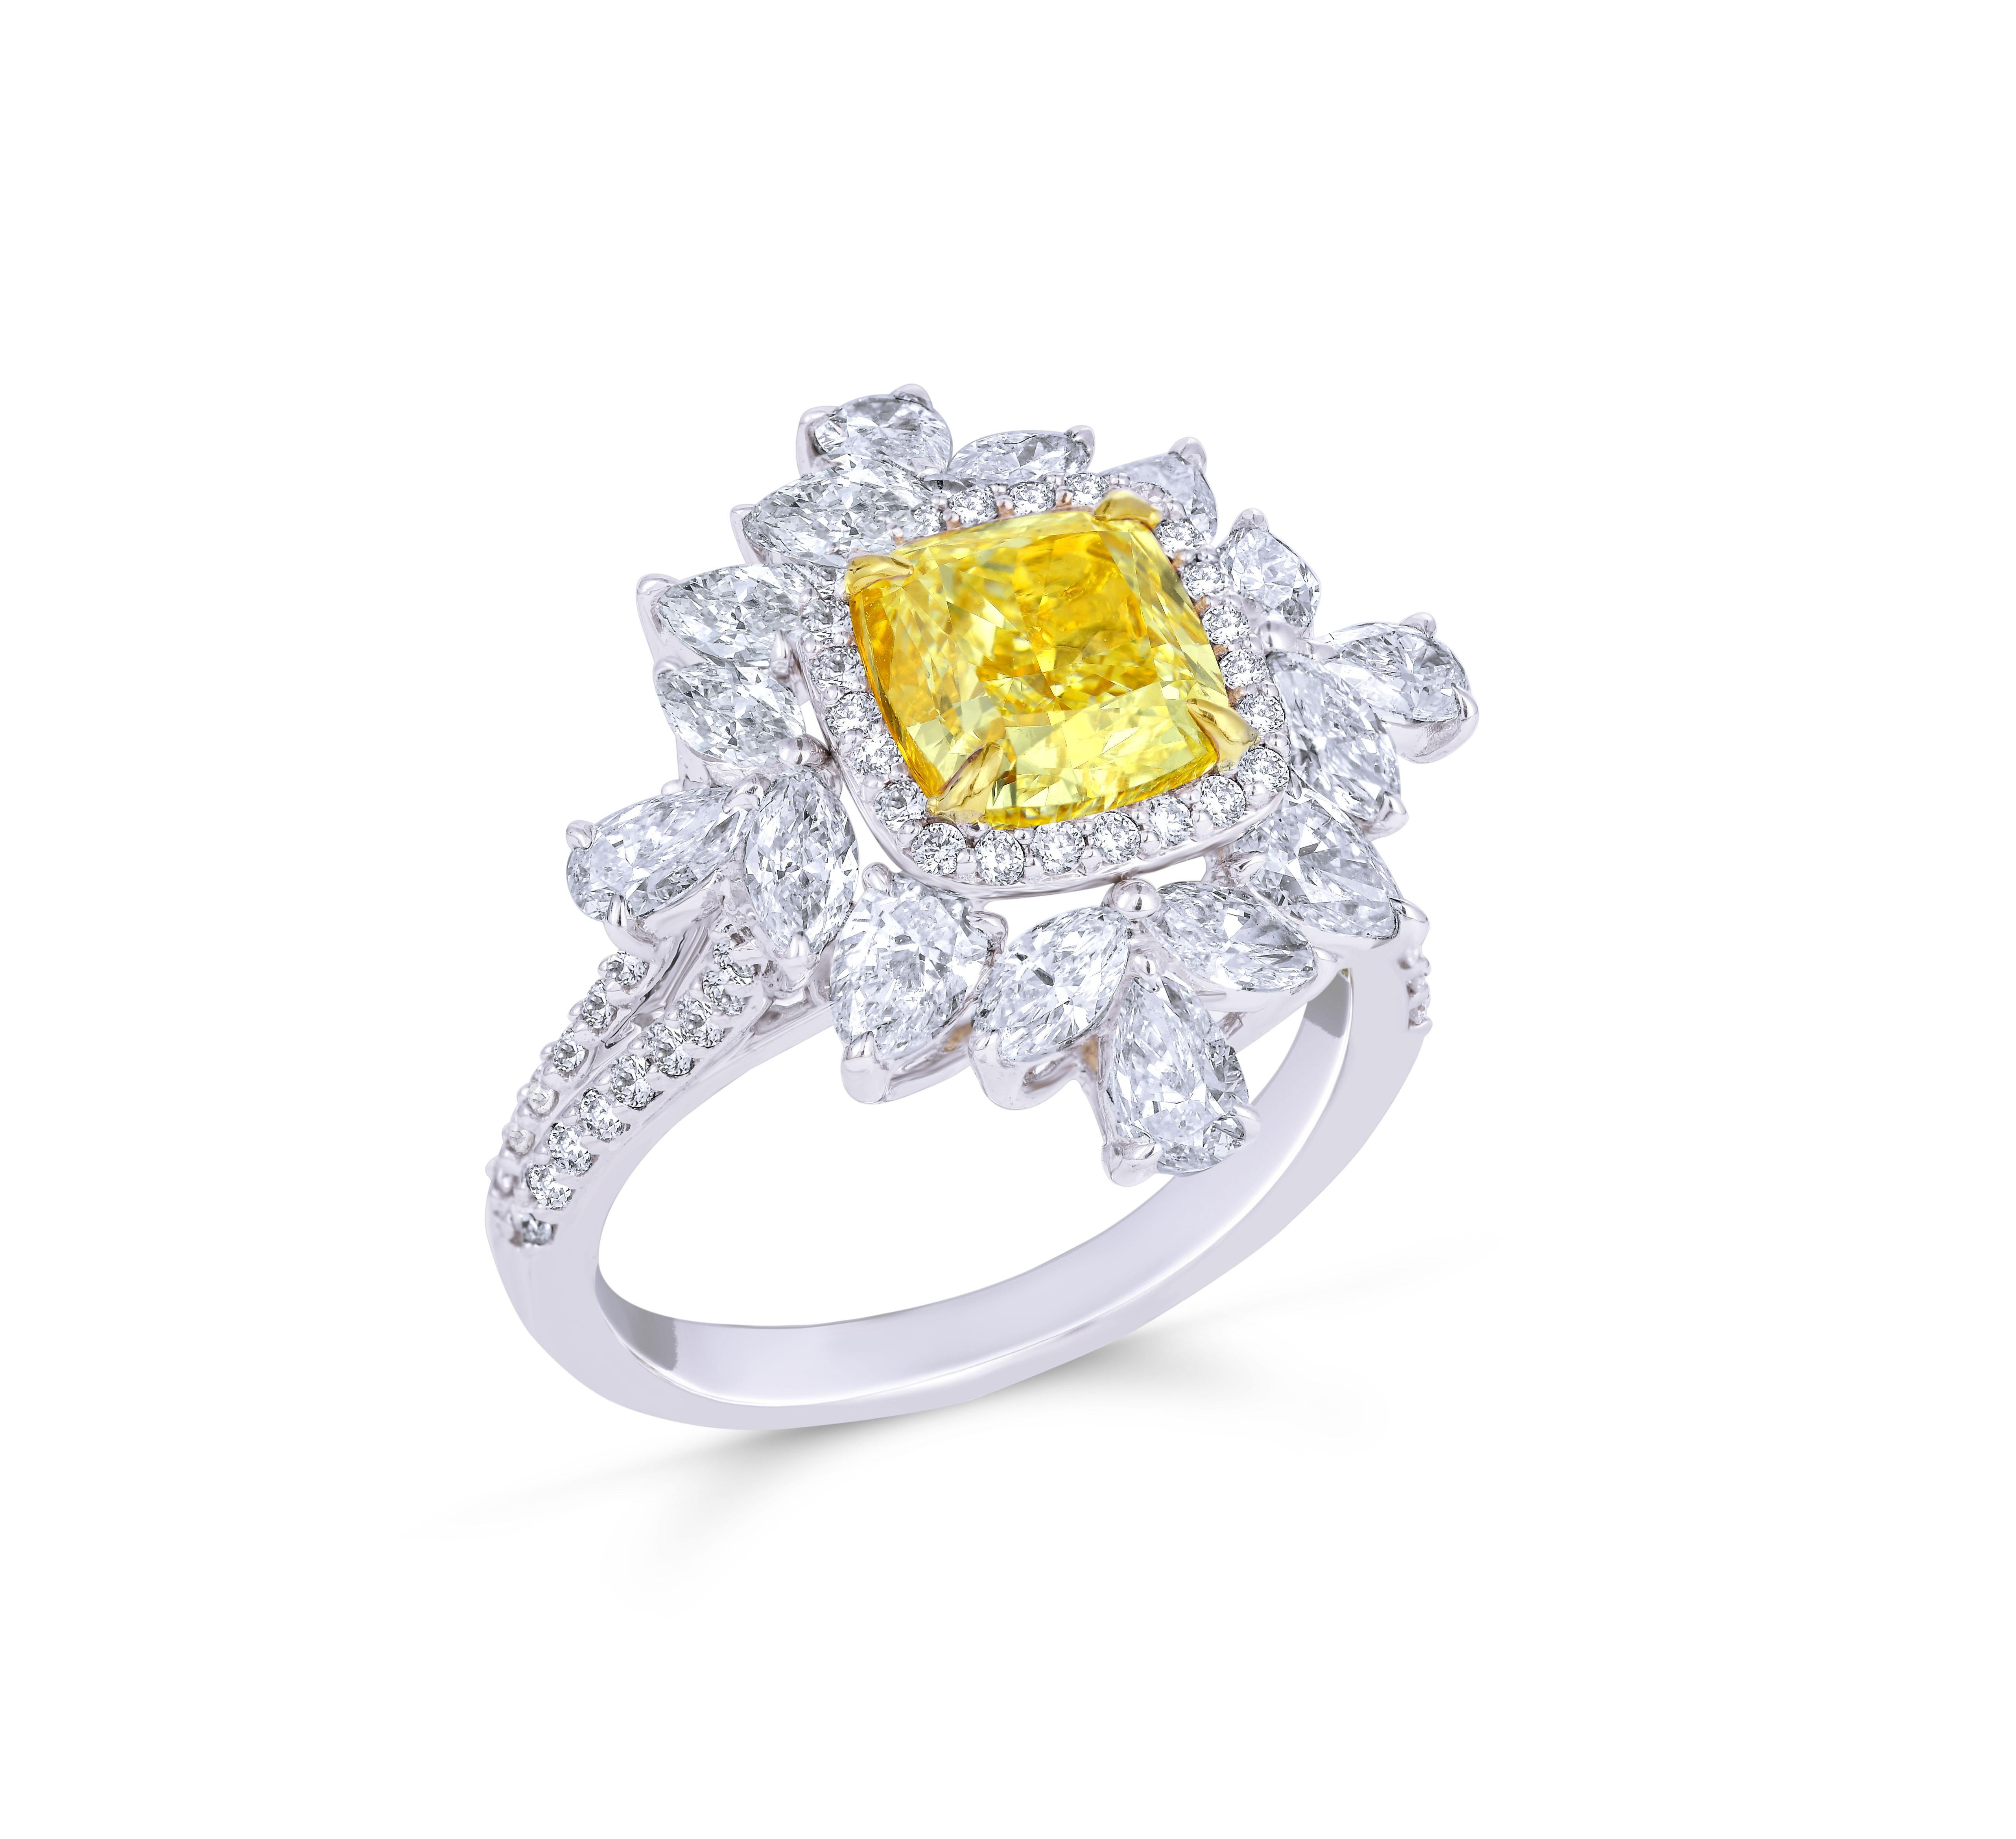 Beautiful cushion yellow diamond ring with white pear, marquise & round diamonds. 2.01ct yellow cushion diamond in the centre completes the look of this gorgeous solitaire ring.

Made exclusively at the state of the art, P Hirani Jewelry Atelier &